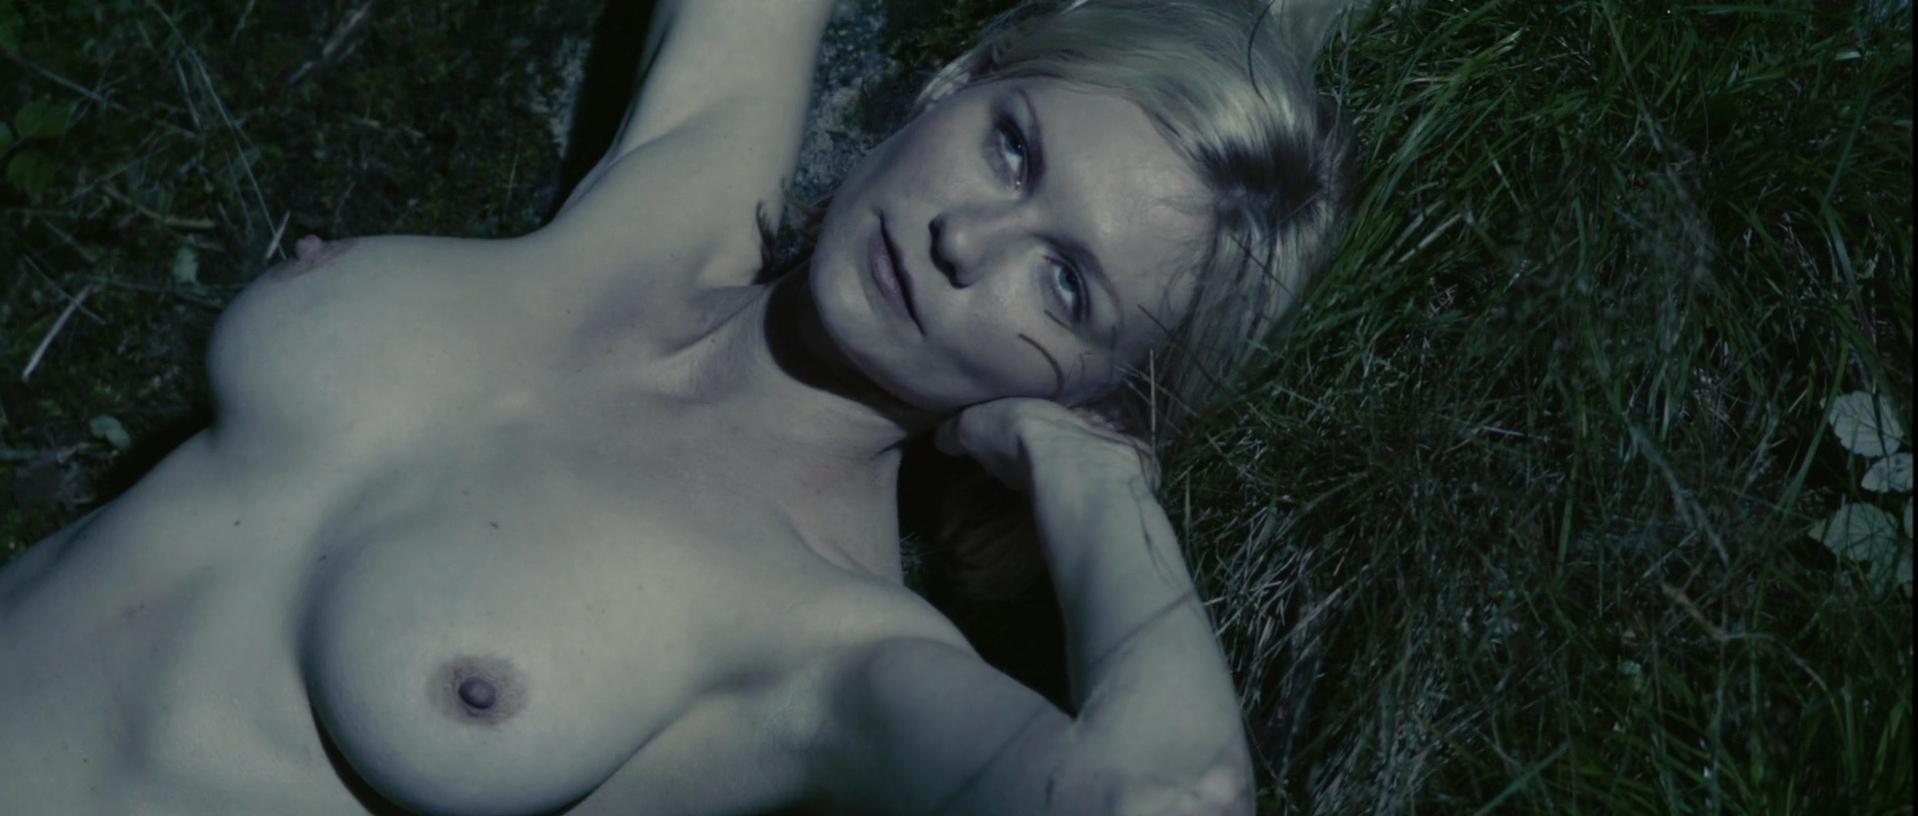 Nude Video Celebs Kirsten Dunst Nude Melancholia 2011 If this picture is yo...